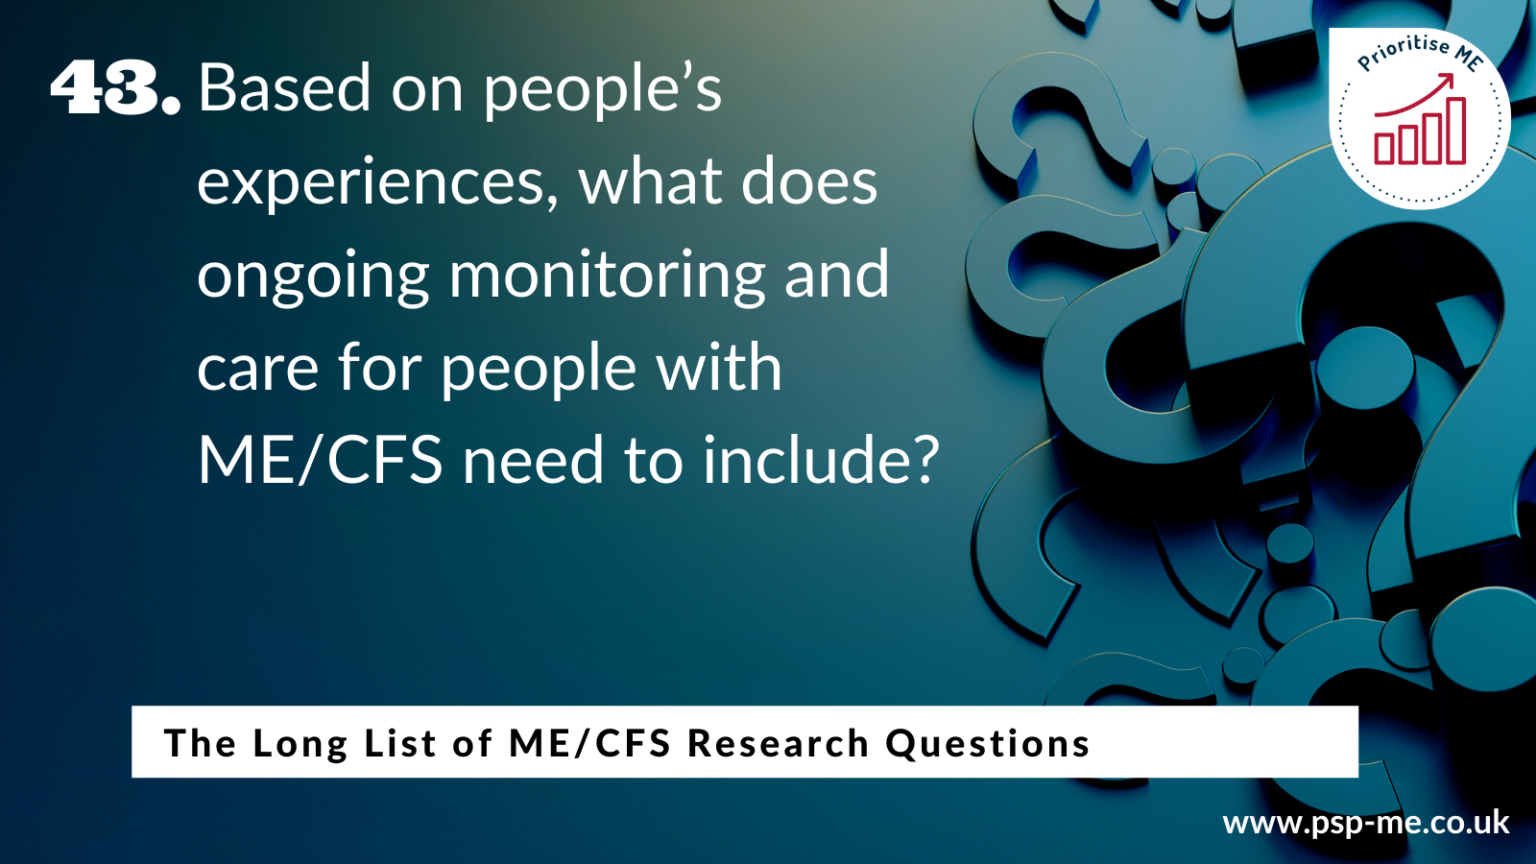 The Long List of ME_CFS Research Questions (43)